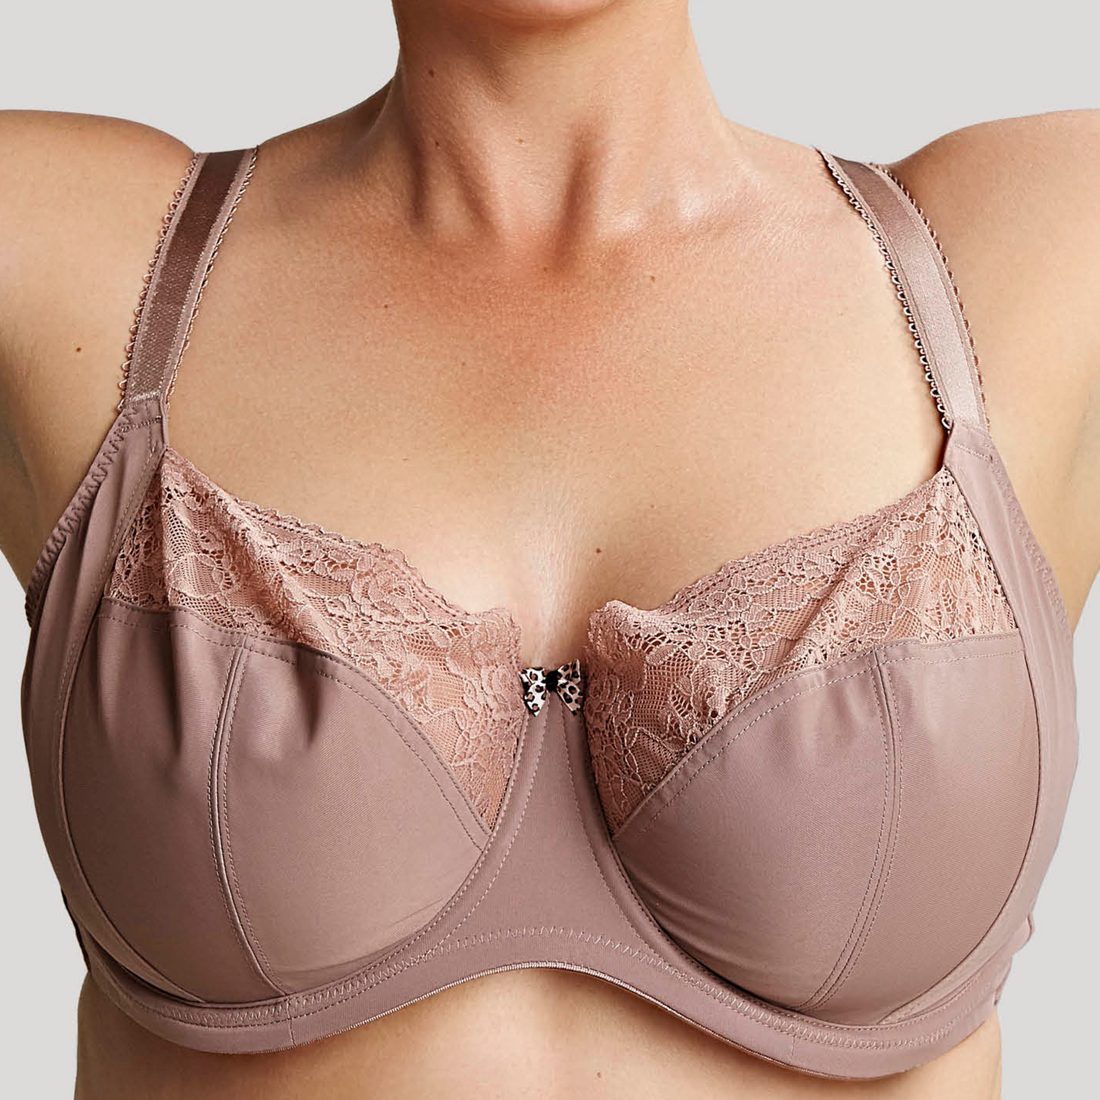 A guide to Ewa Michalak's bra styles, names & sizing - Big Cup